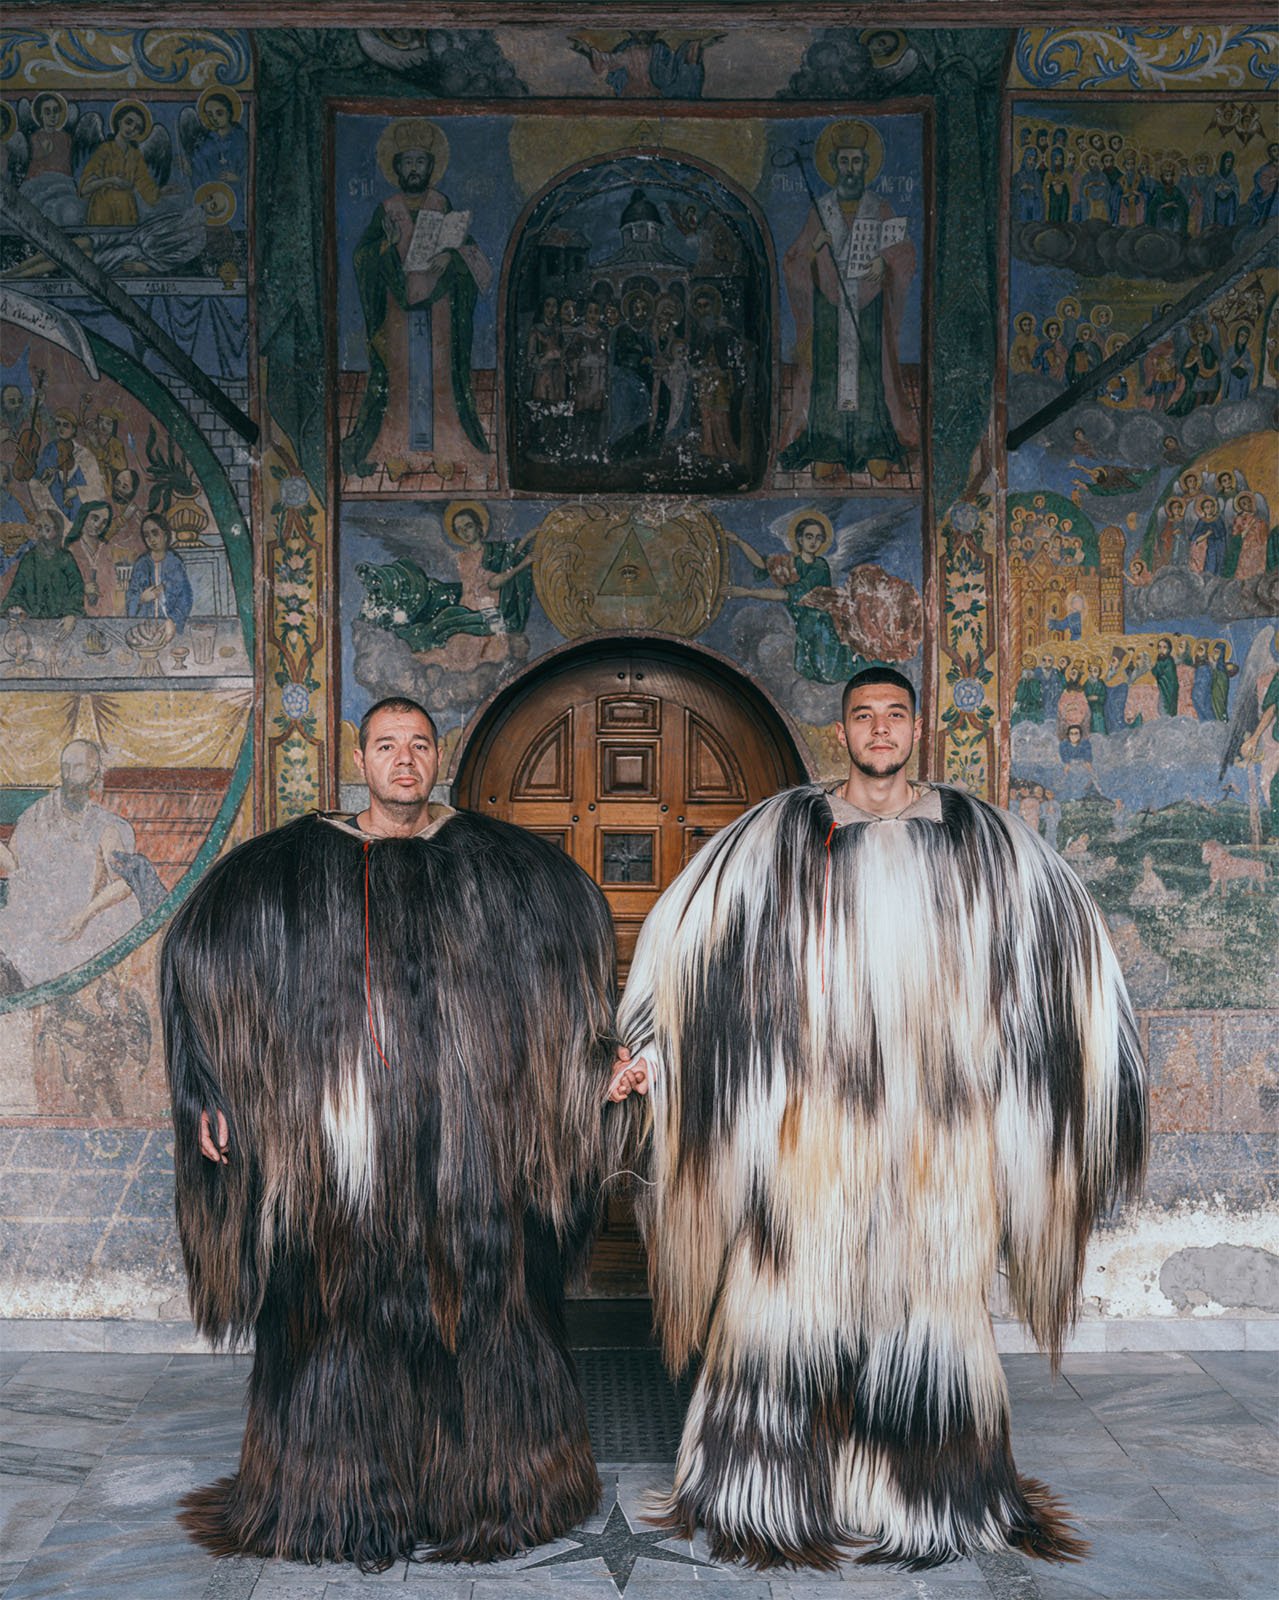 Two men stand in front of an ornately decorated church entrance, wearing traditional long, shaggy wool garments. the wall behind them features vibrant religious frescoes.